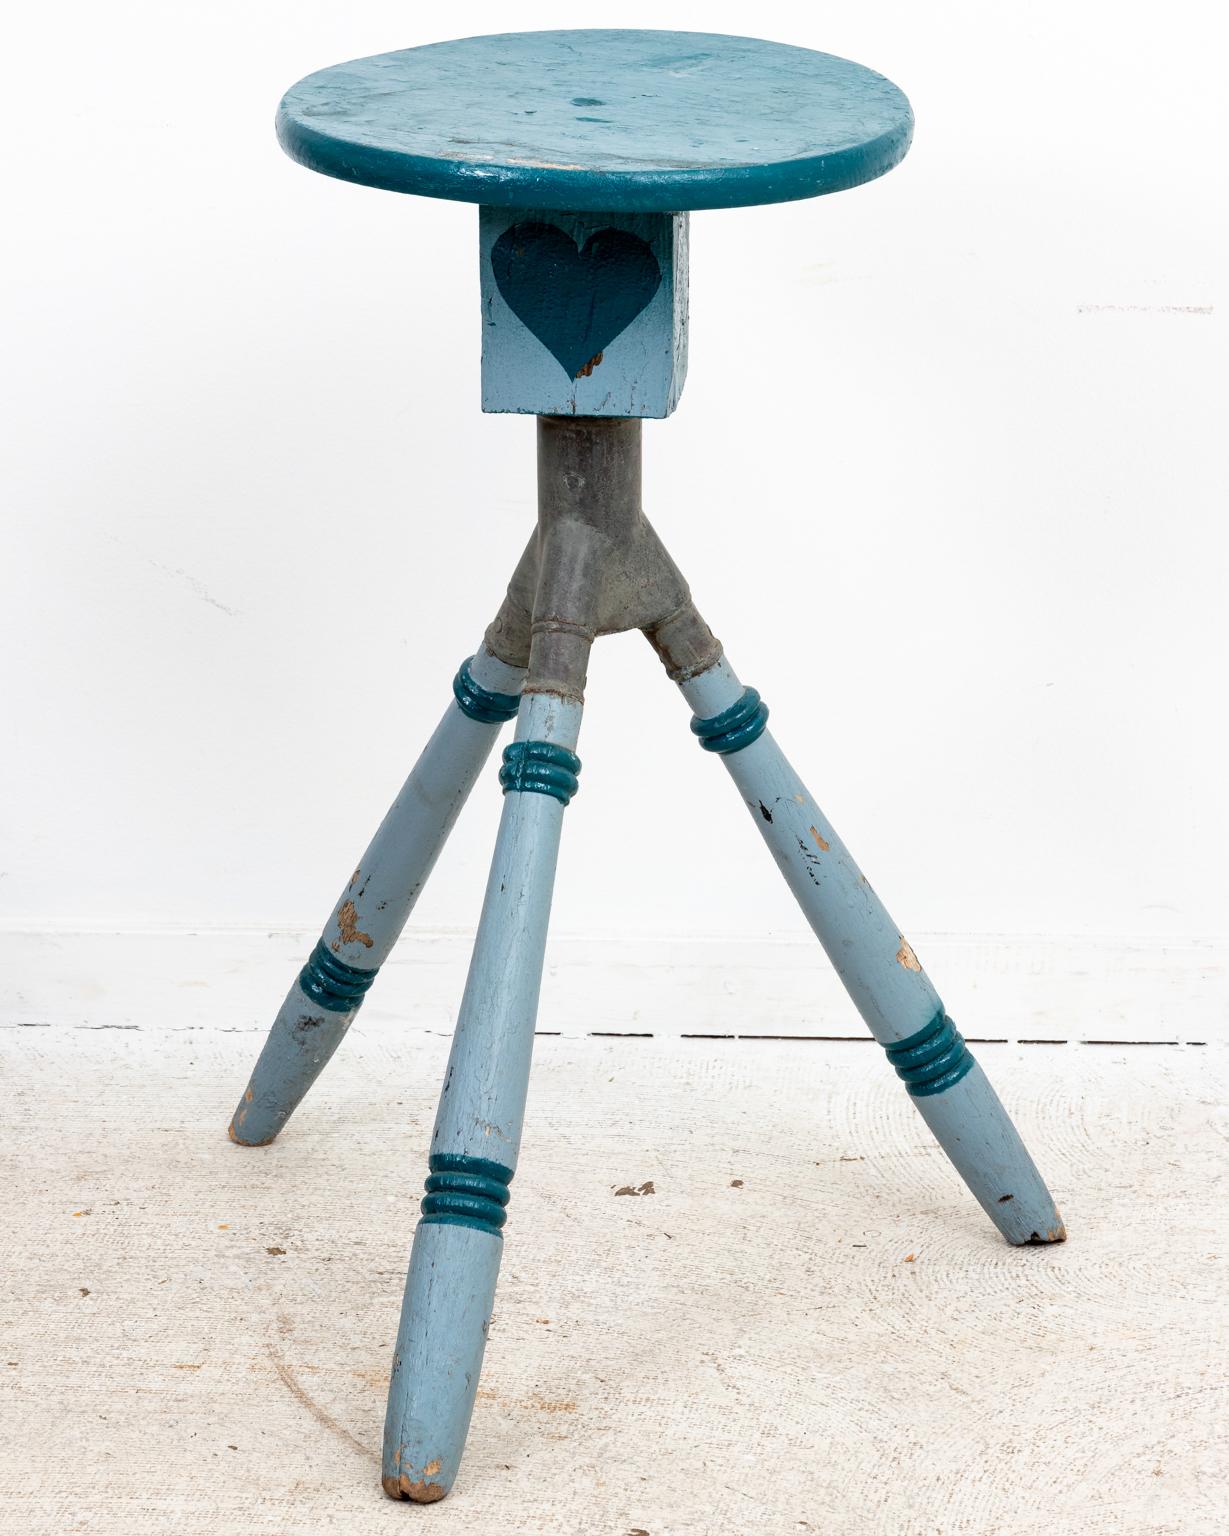 Blue painted folk art side table on tripod base with card suit motifs. The tripod base features a metal attachment to the stem that supports the round top. The piece is painted in tones of blue with King, Queen, Jack, and Ace symbols on the block